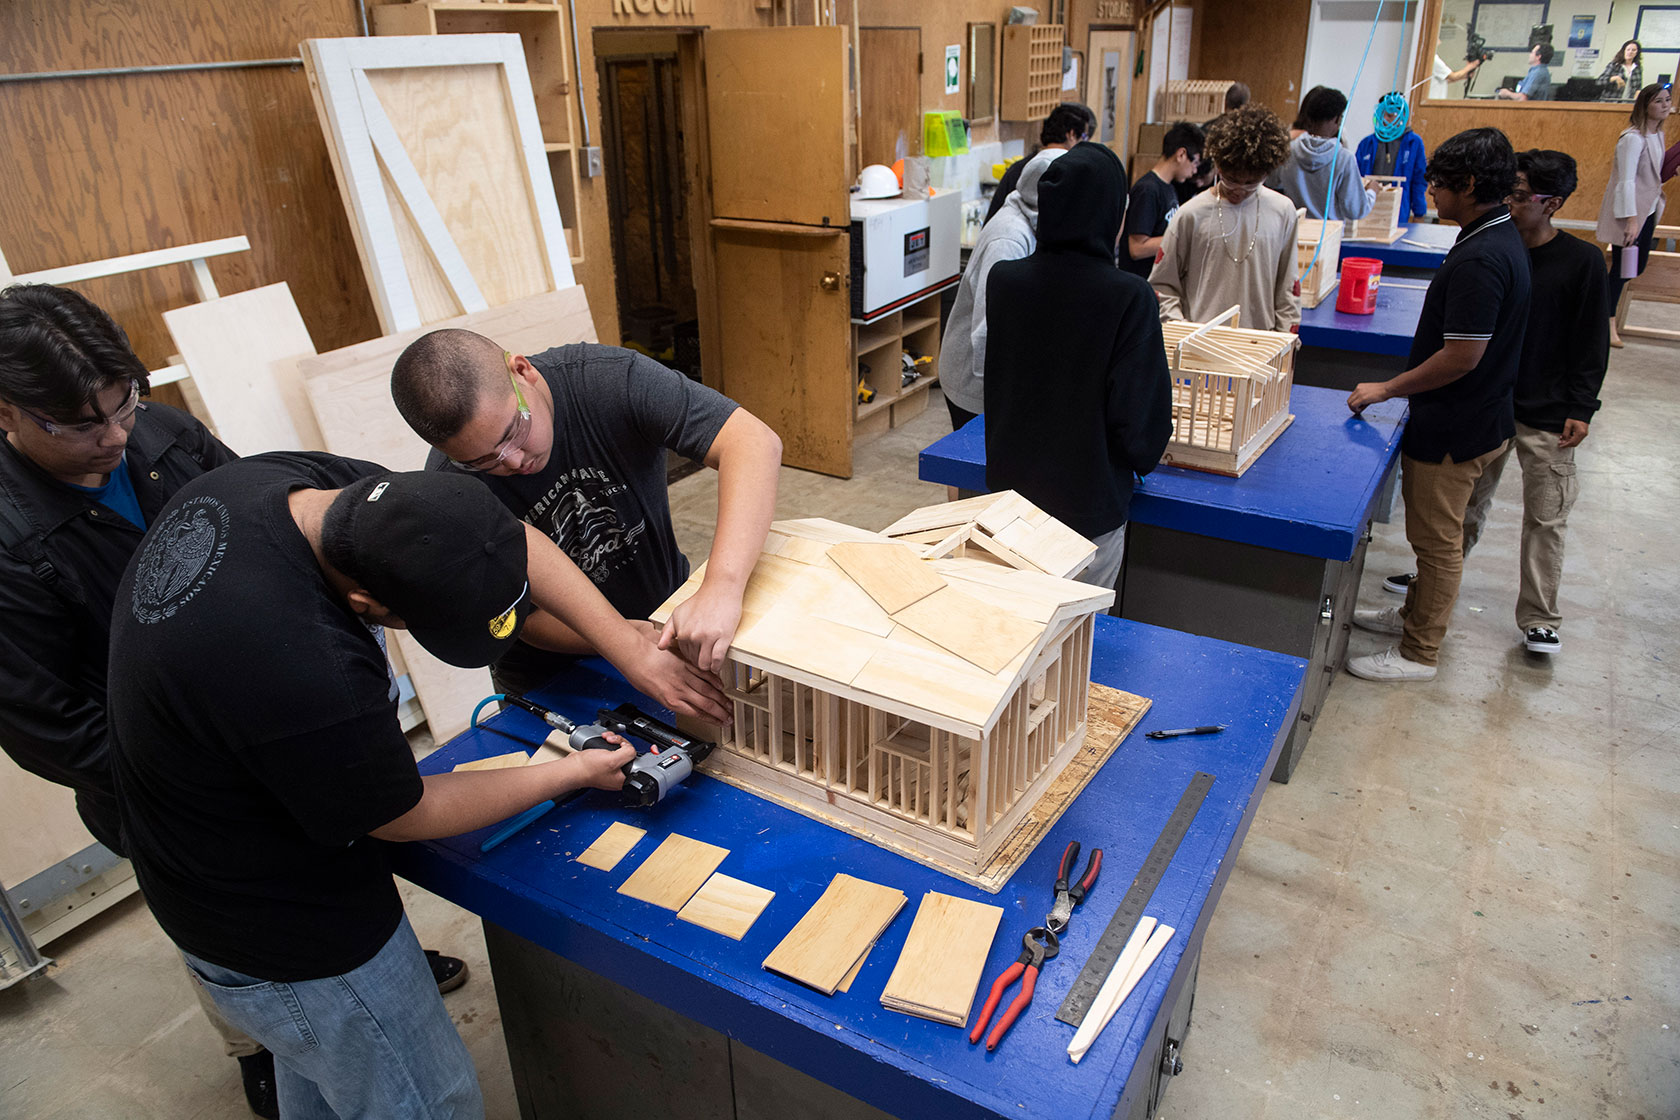 Photo shows a group of students gathered at two tables assembling wooden model homes